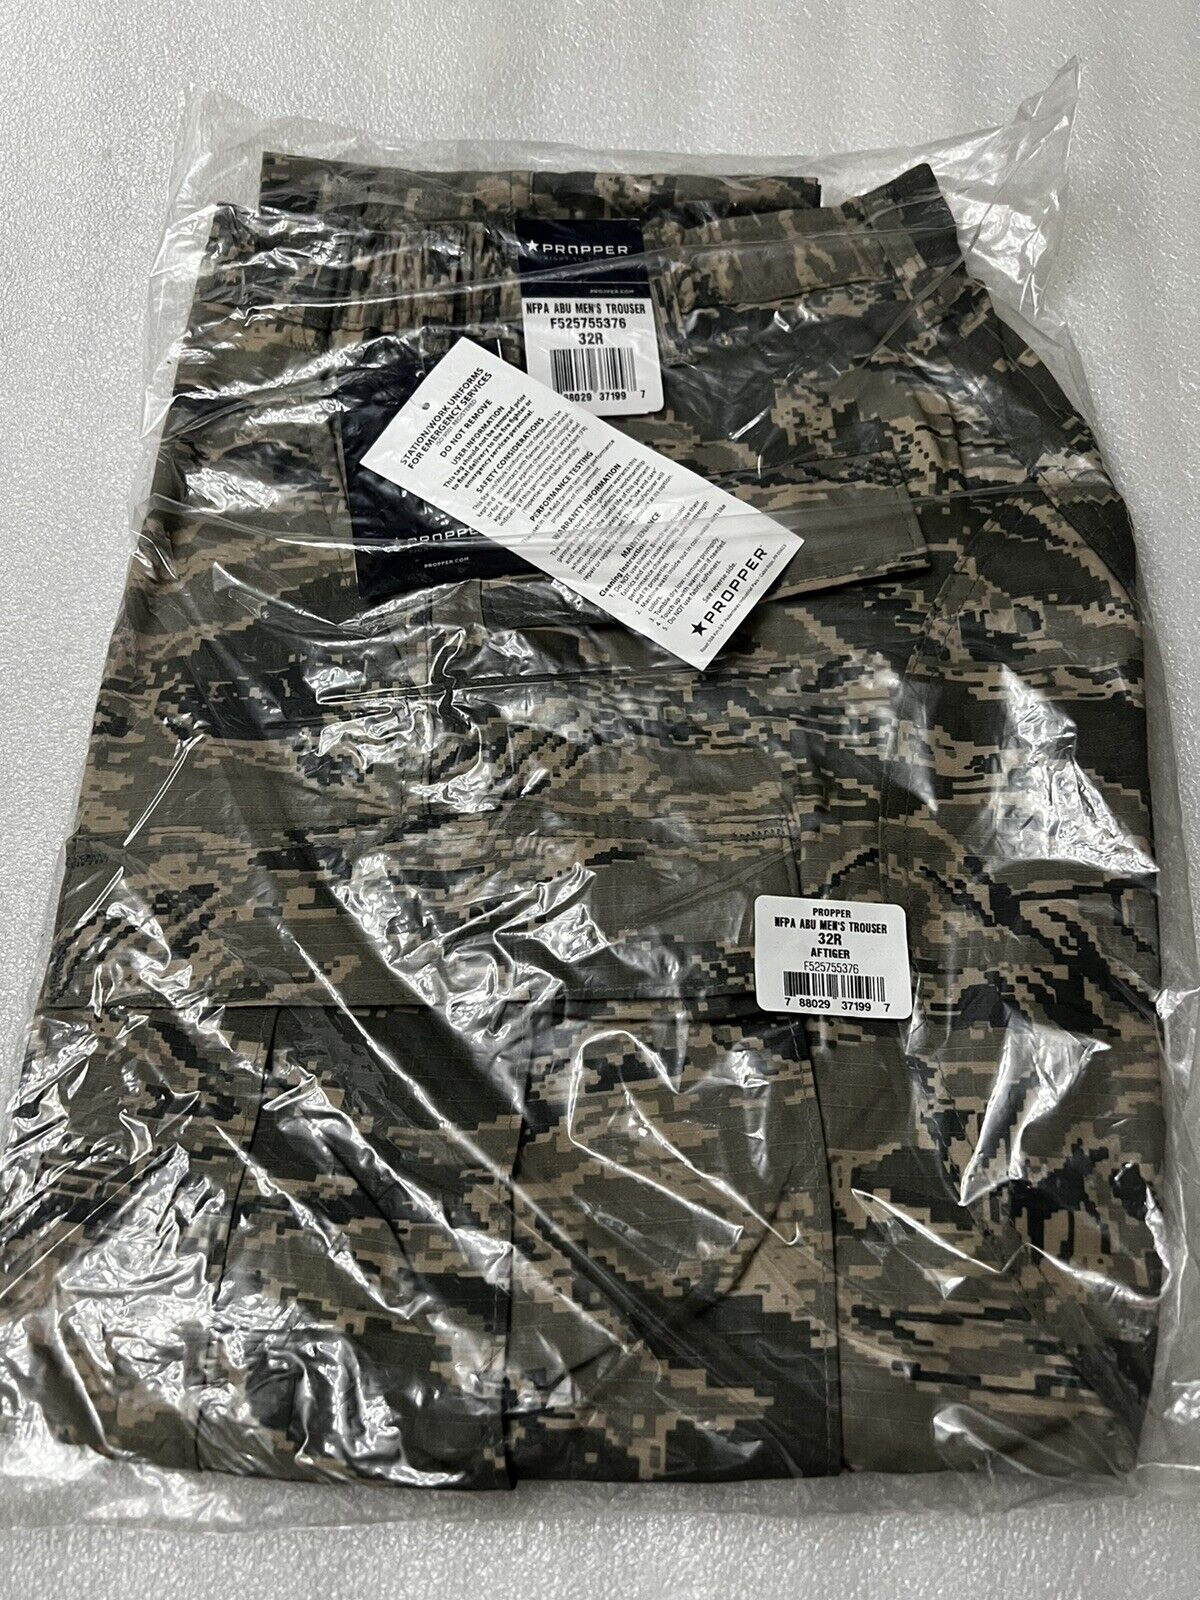 US Air force Military Propper ABU Pants Trousers Men's US Size 32 R,Ripstop New